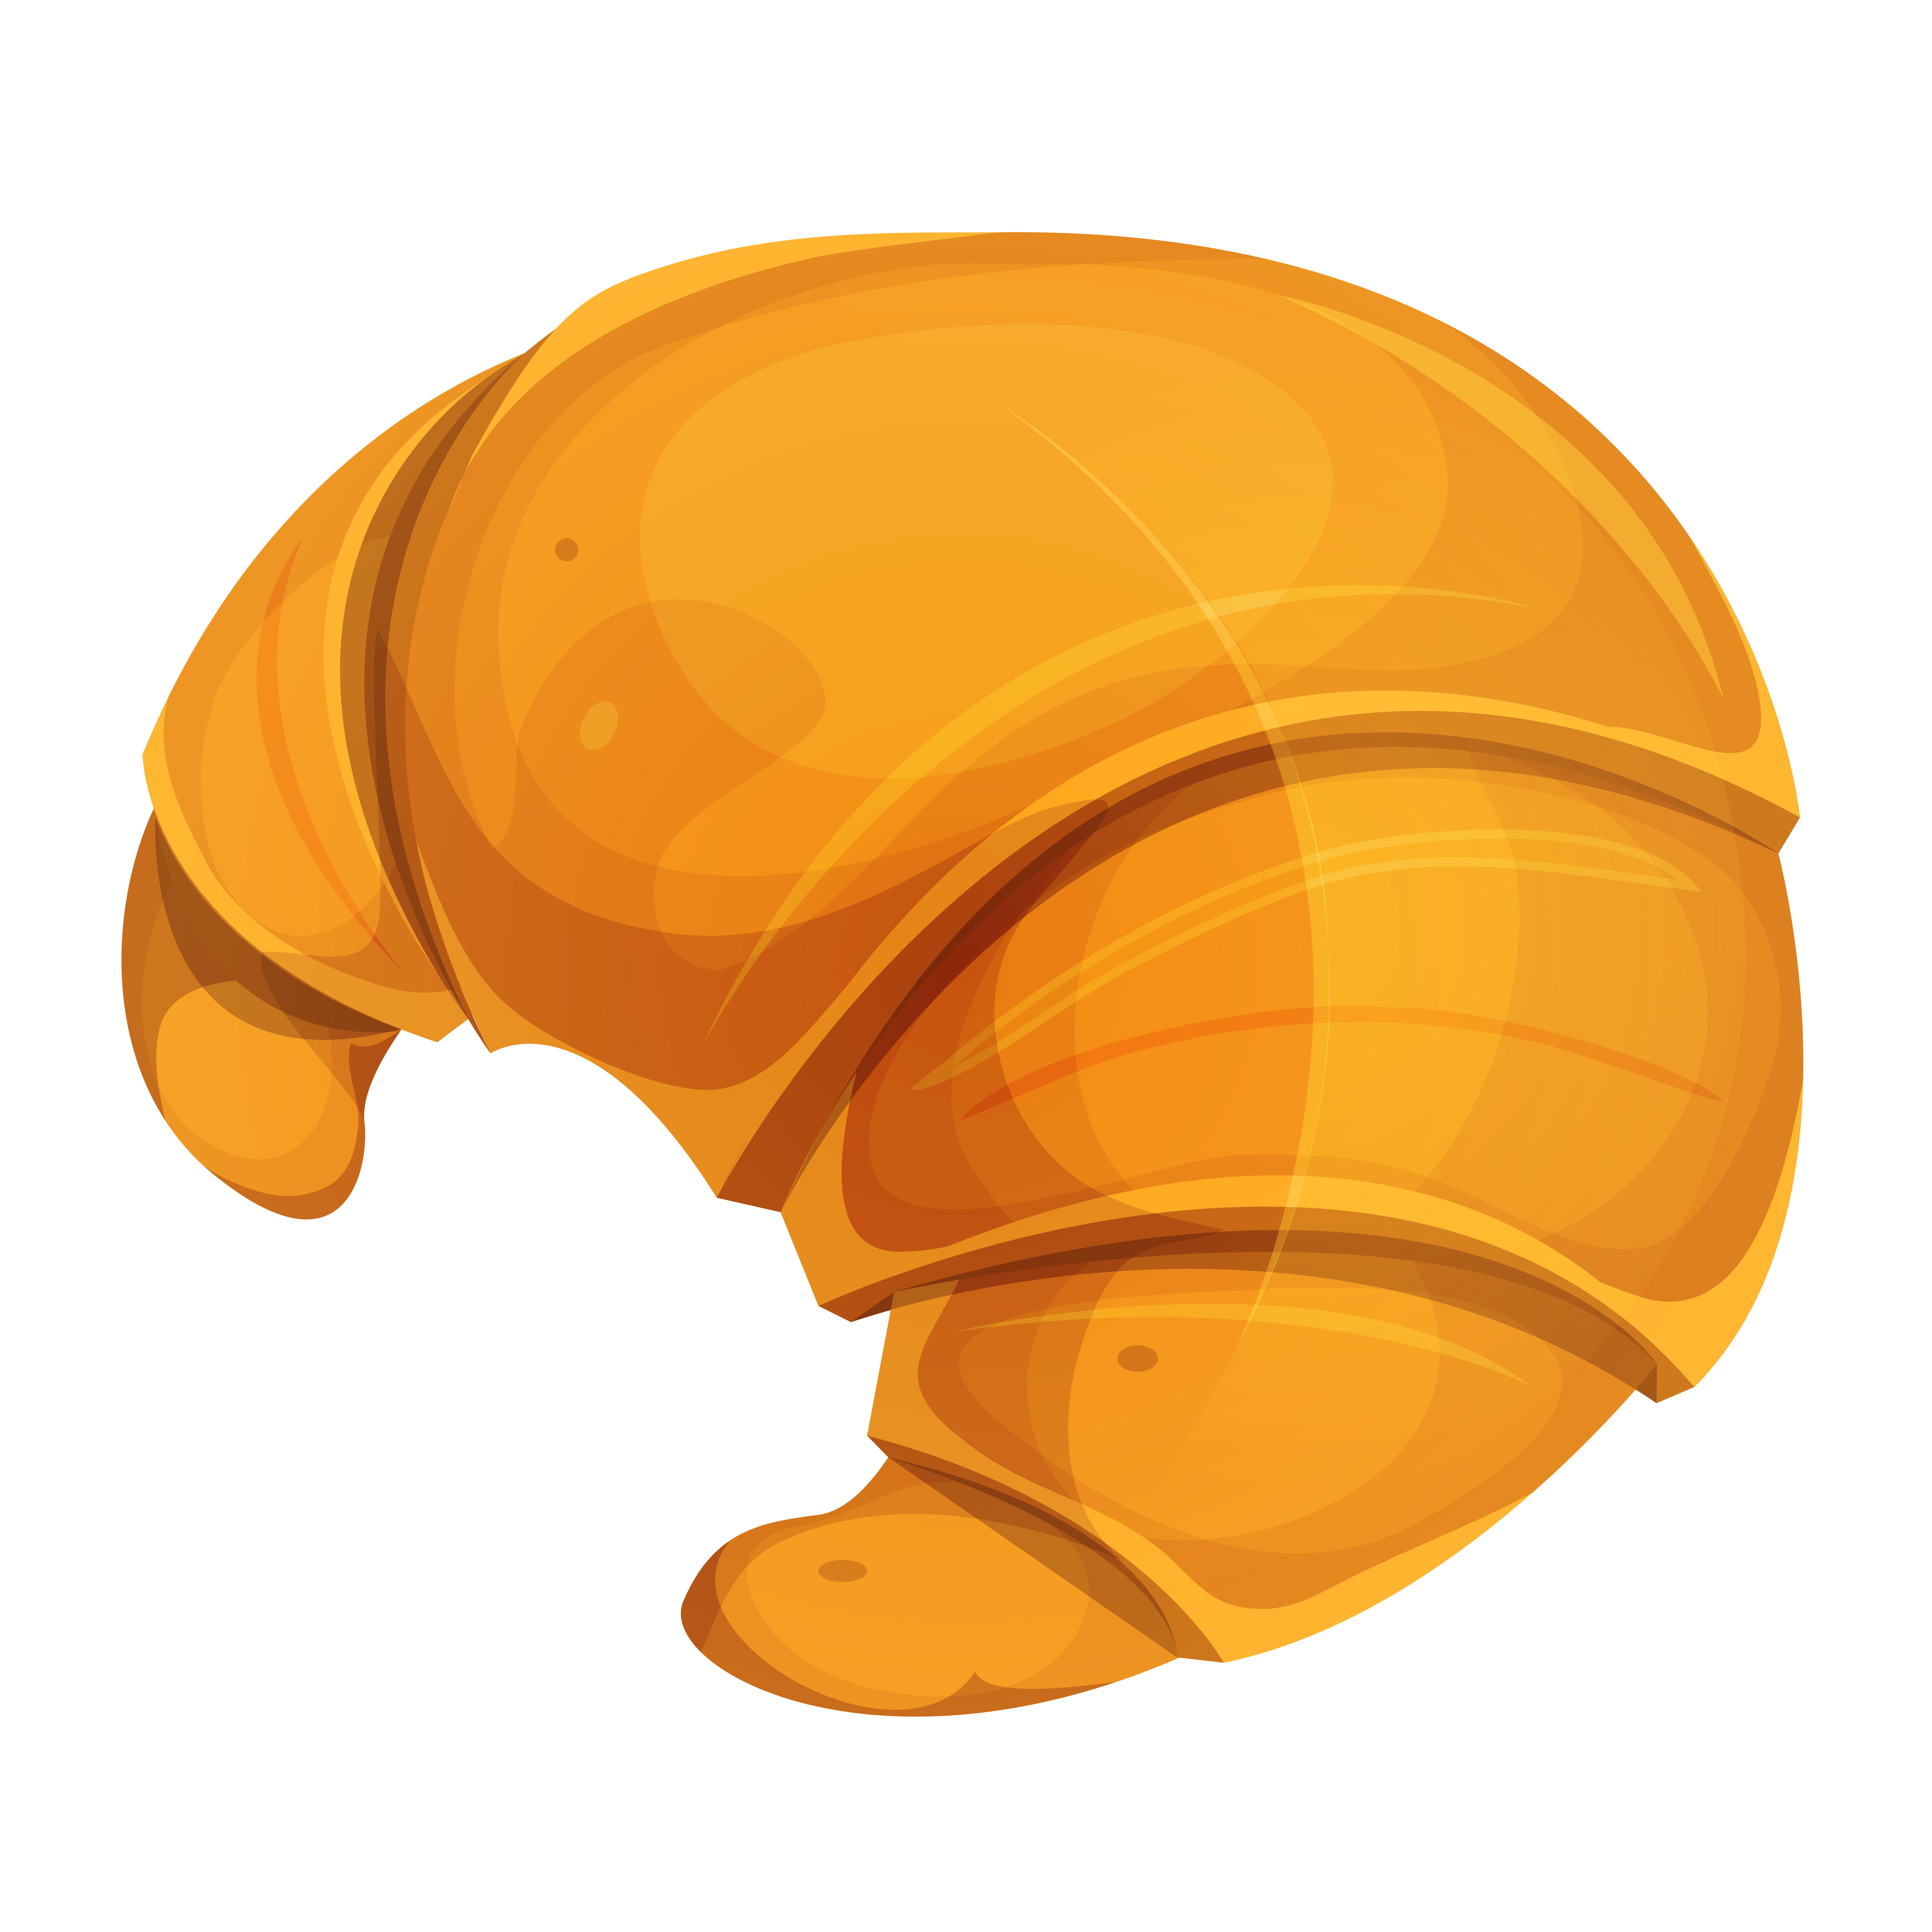 French croissant icon.